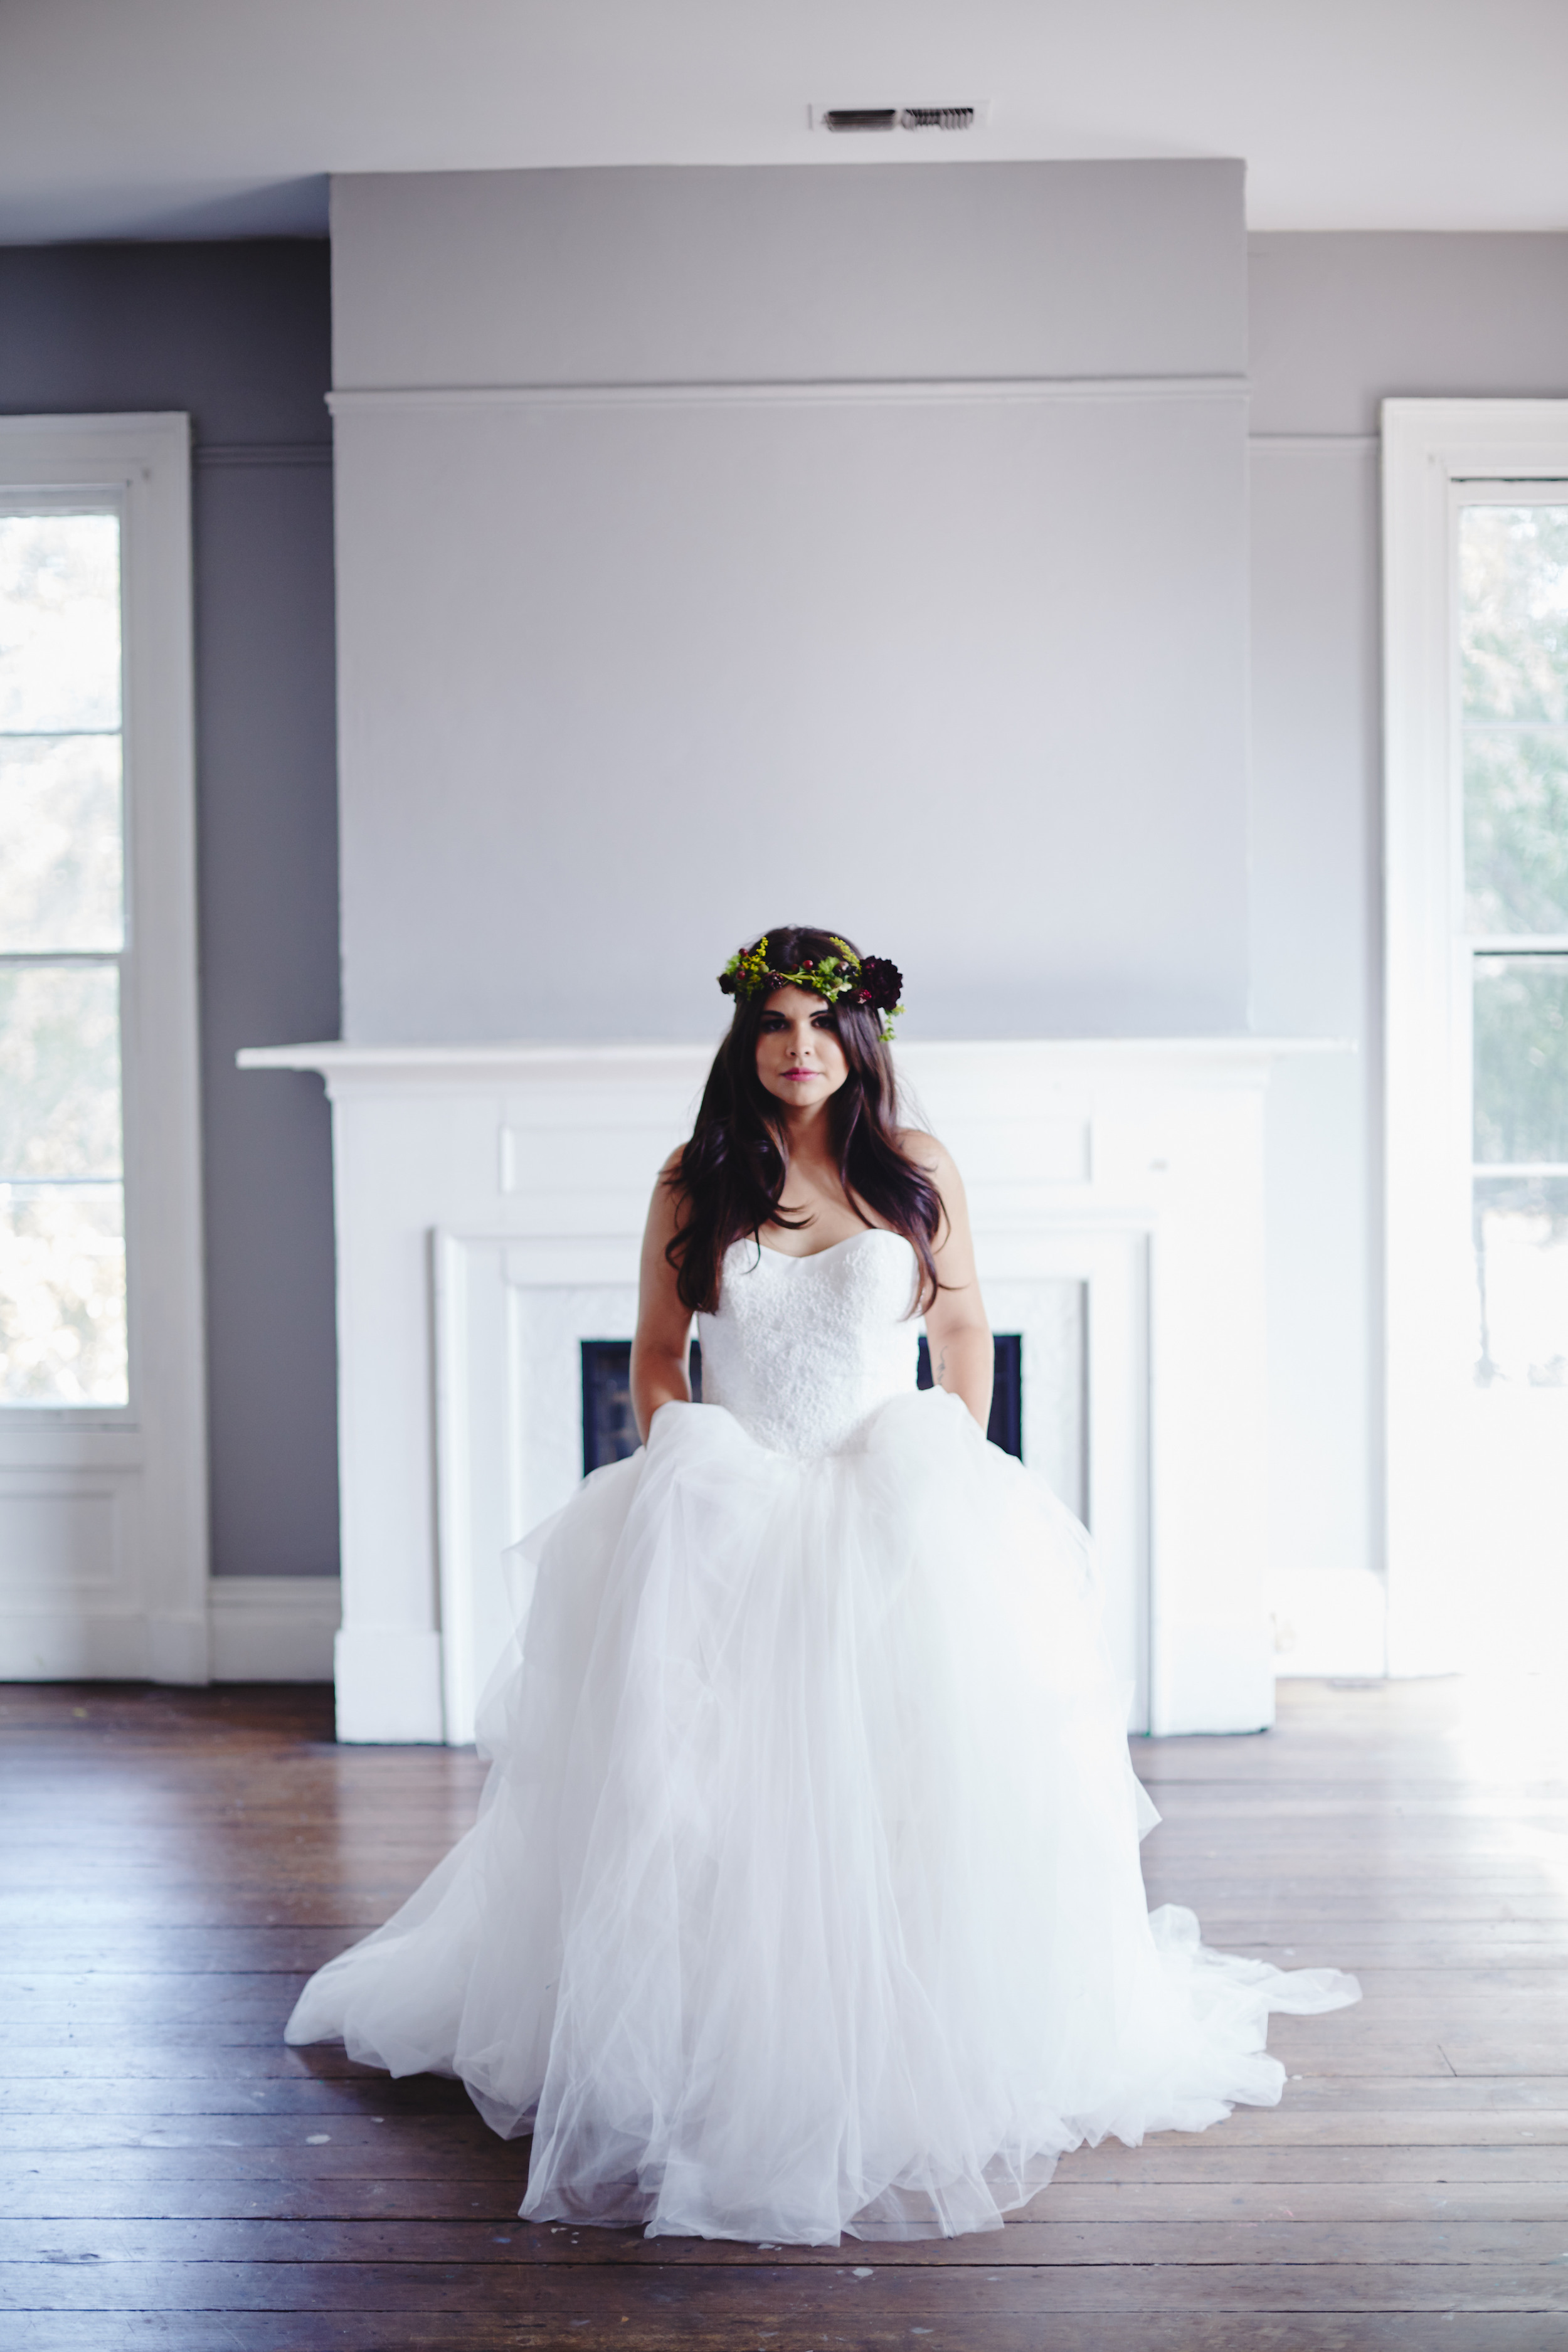 Styled_Session_Cherie_Bridal_Portraits_House_of_the_Bride 69.jpg